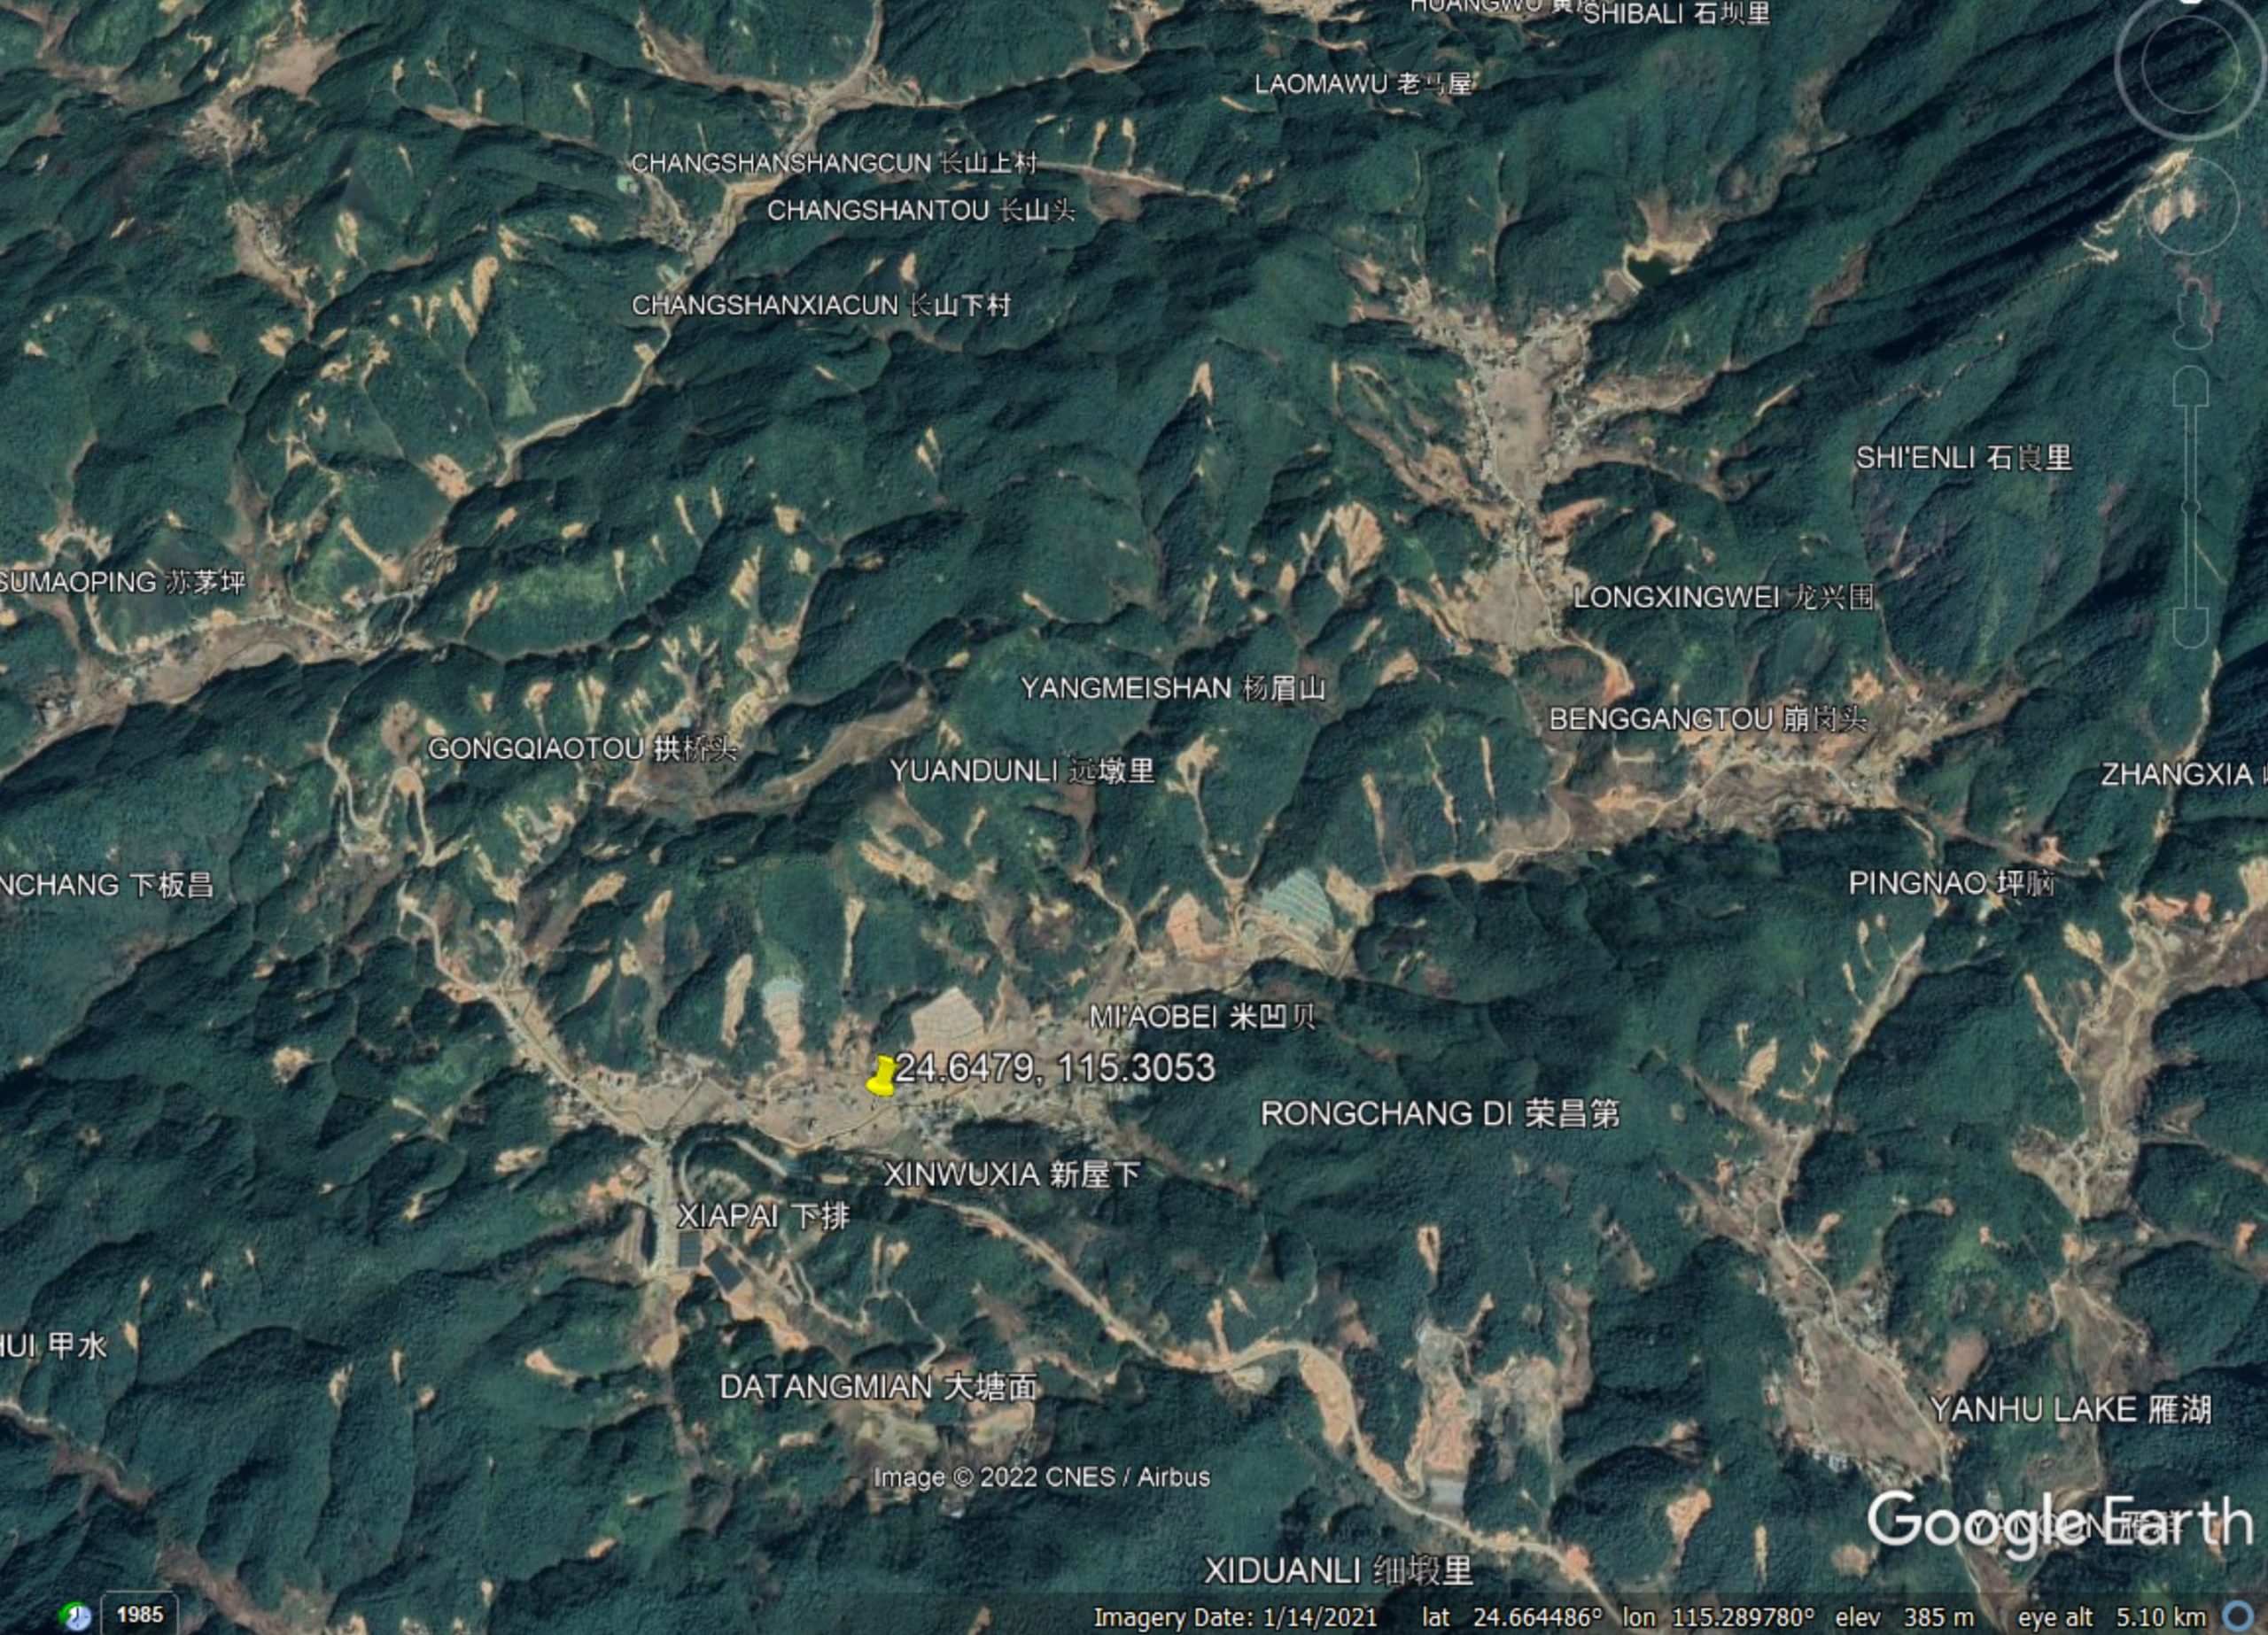 A Google Earth image of the 2019 landslides in the vicinity of Mibei village in Guangdong.